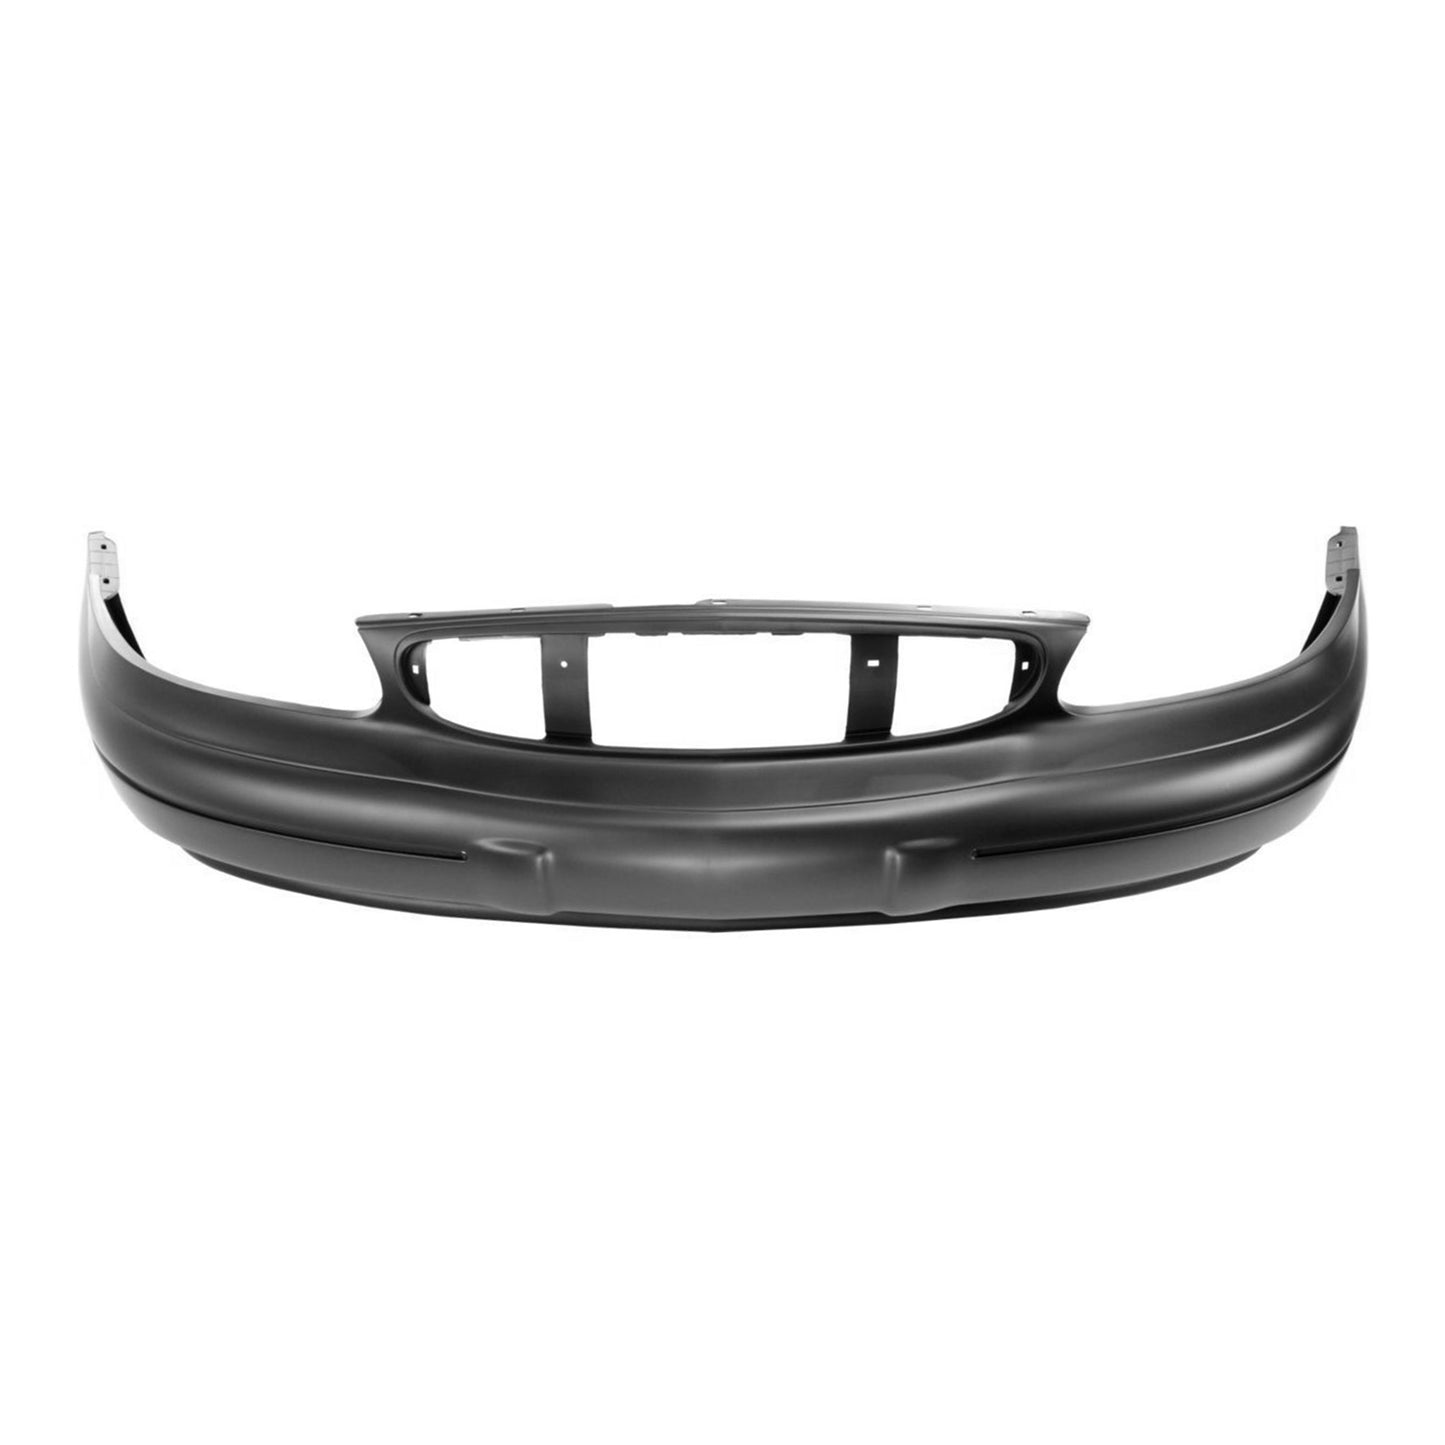 Buick Century 1997 - 2003 Front Bumper Cover 97 - 03 GM1000543 Bumper-King